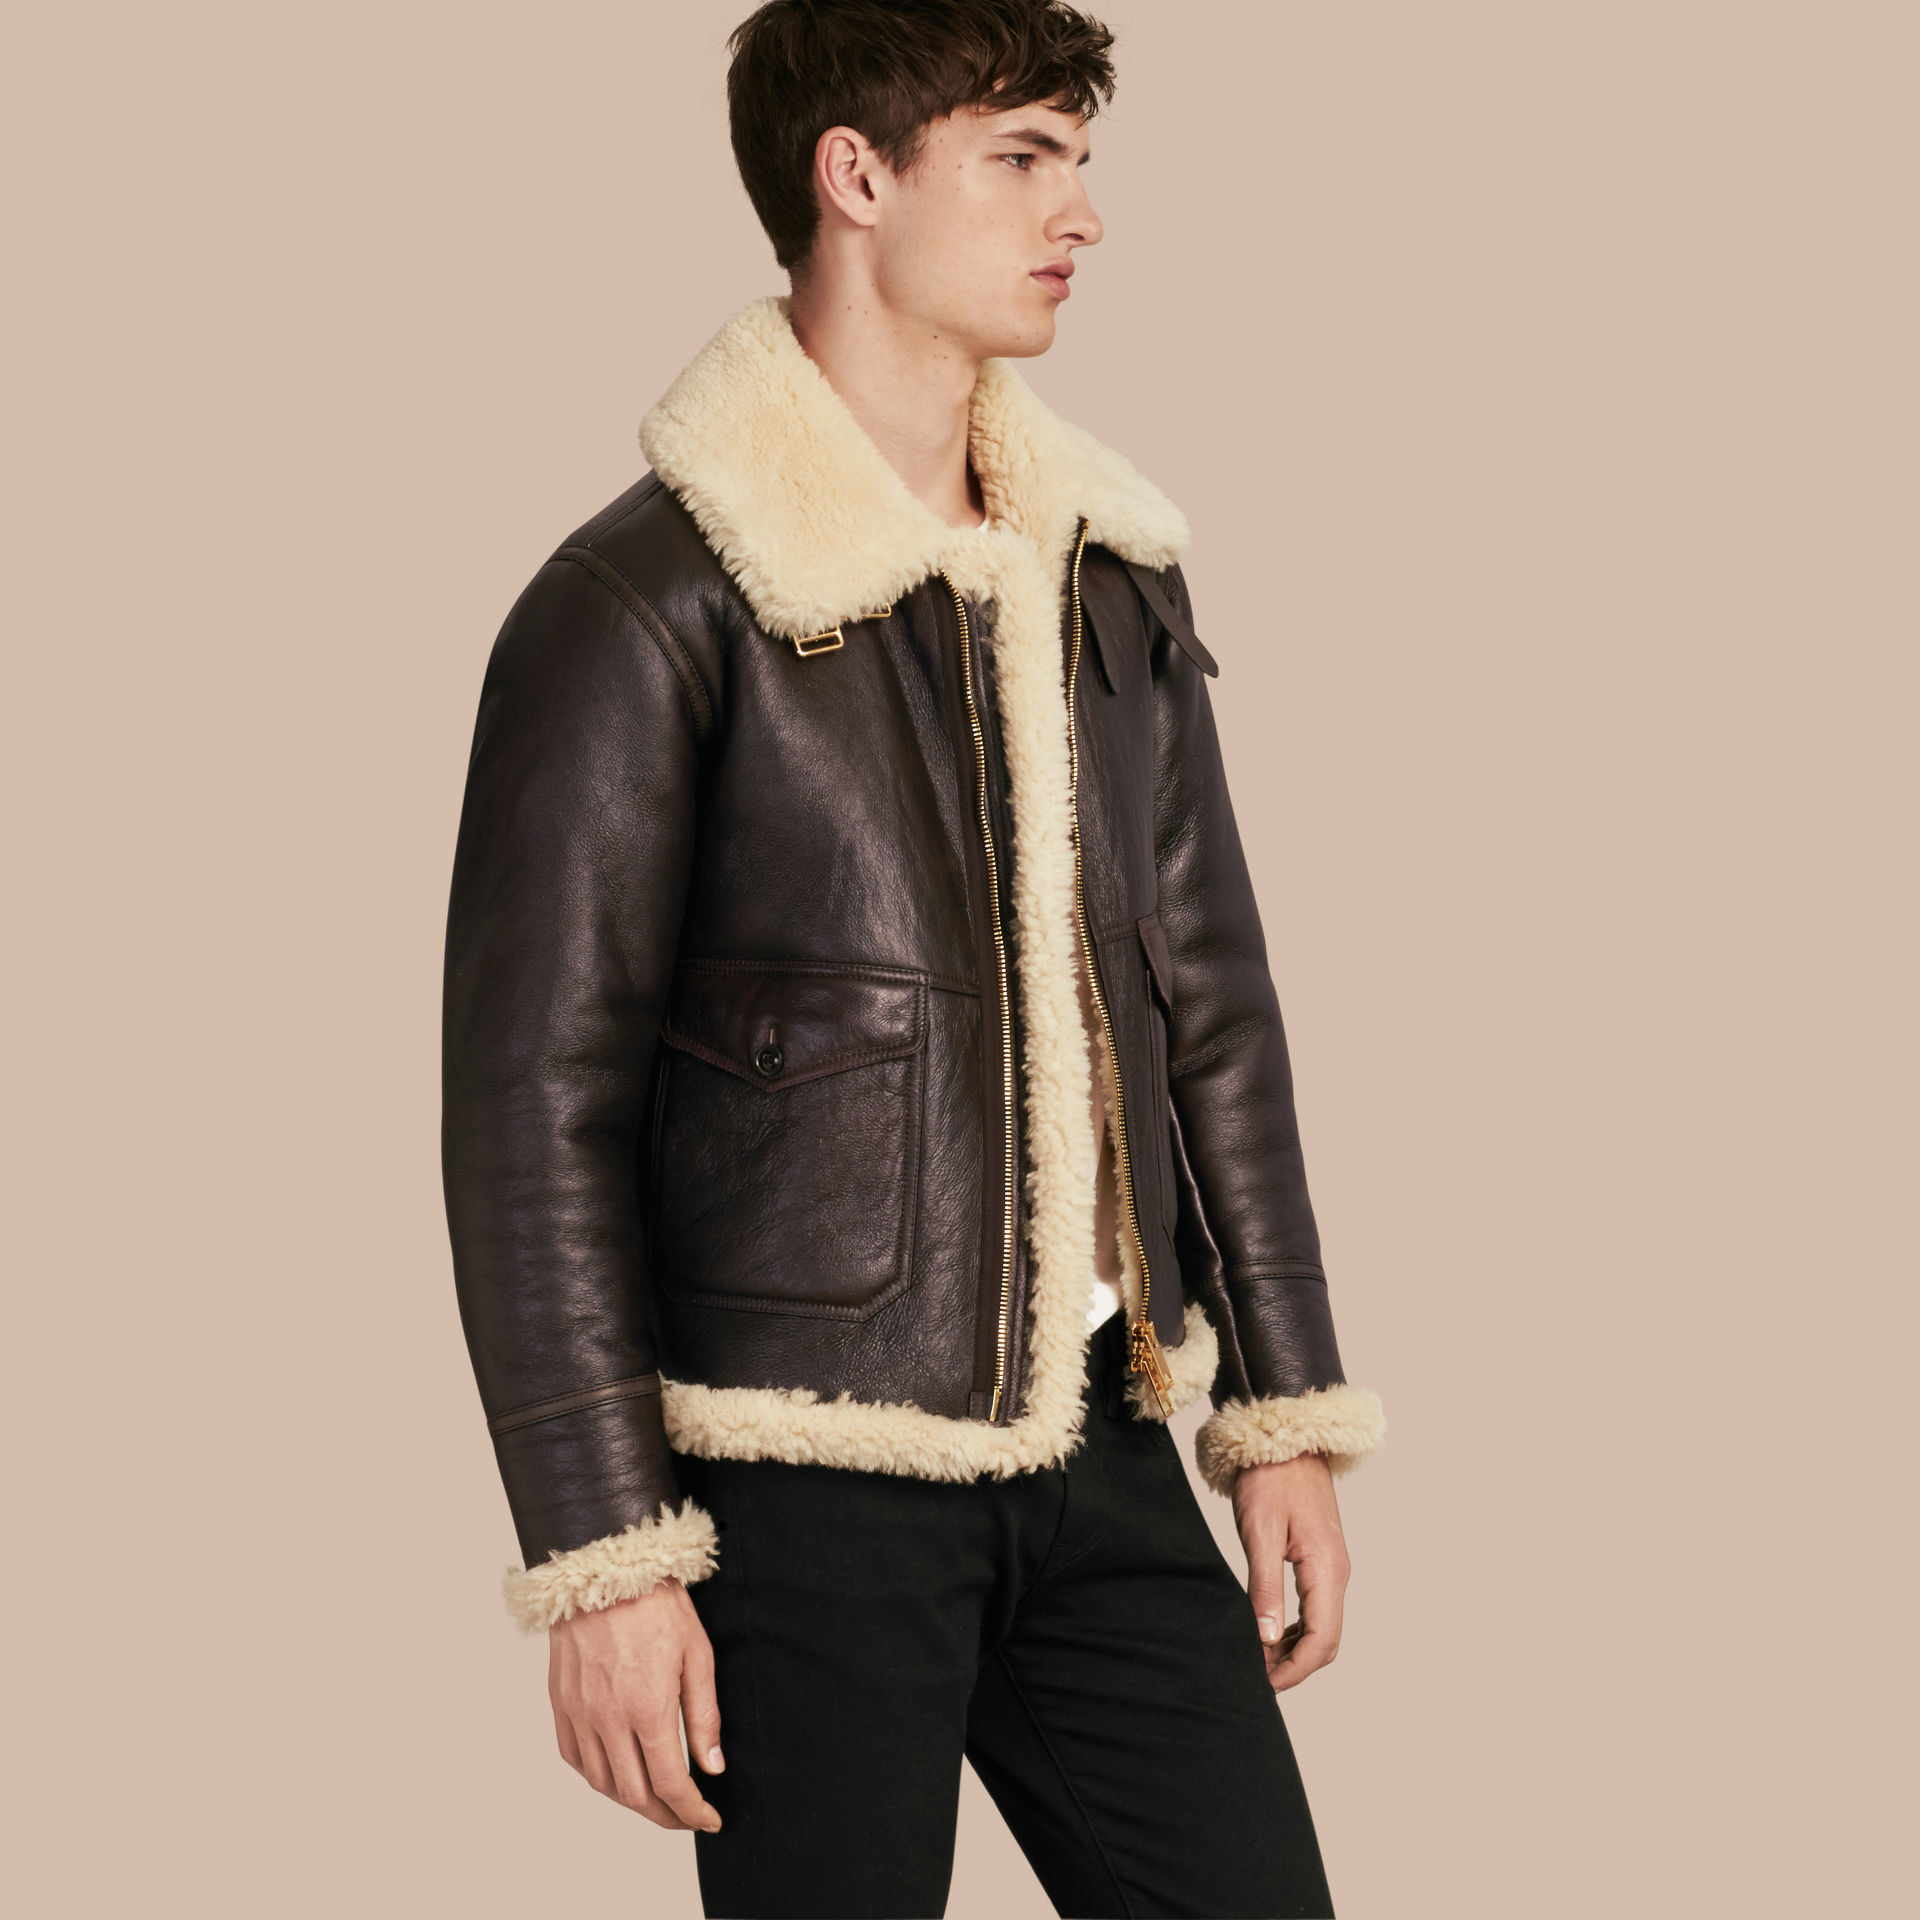 Burberry Leather Shearling Aviator Jacket for Men - Lyst